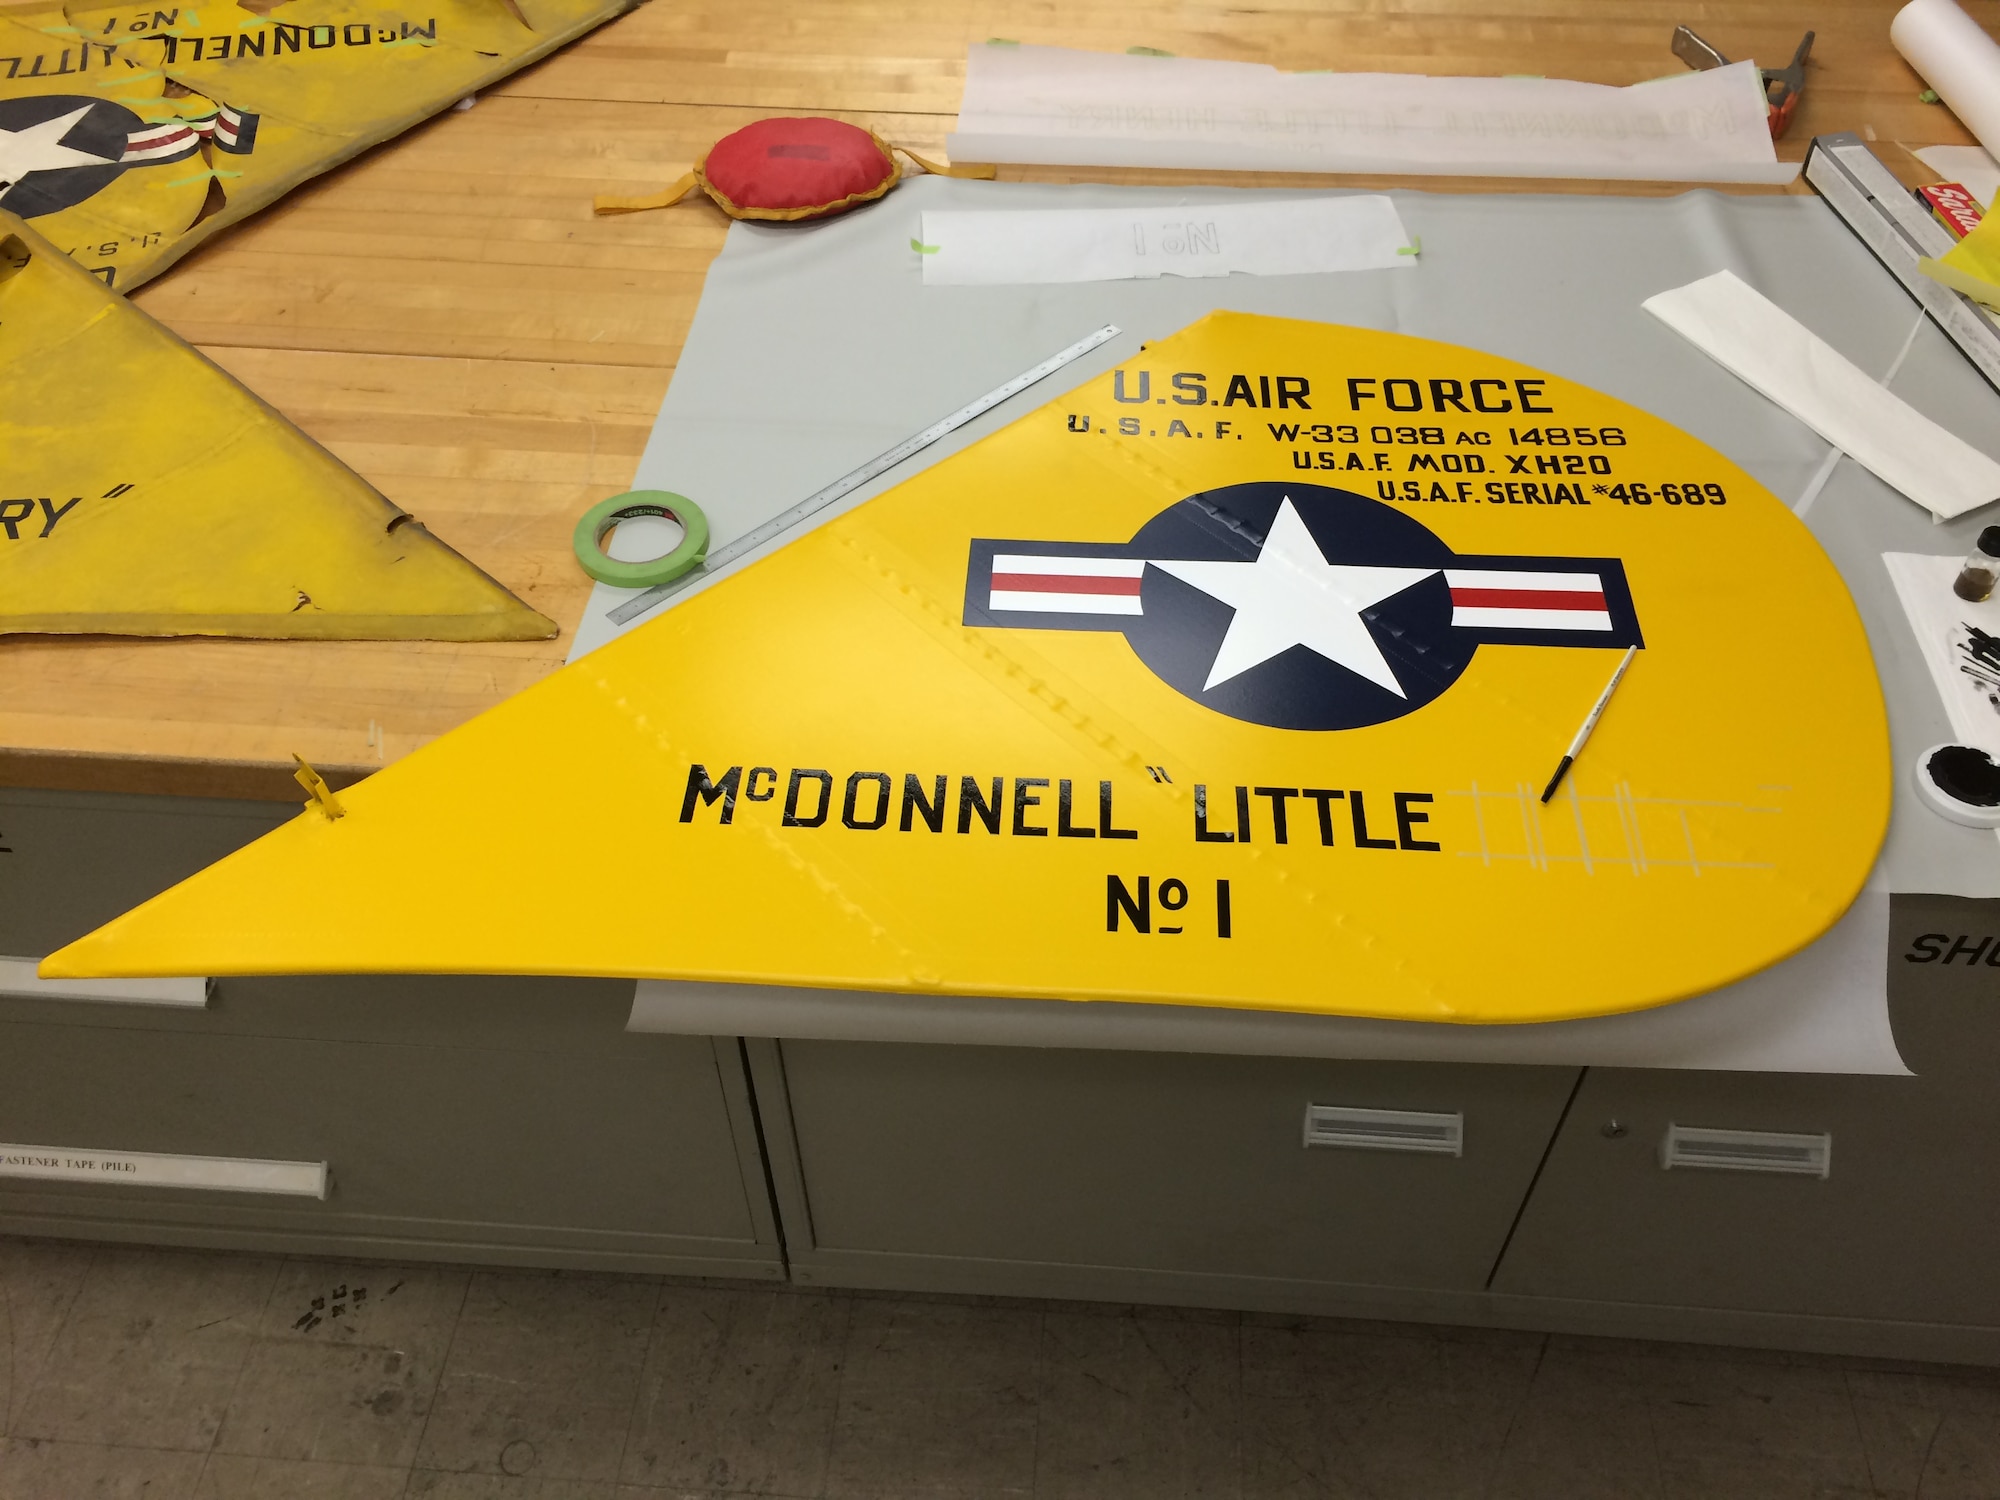 DAYTON, Ohio -- McDonnell XH-20 Little Henry tail section undergoing restoration during Spring, 2016 (photo 4 of 4). This aircraft is on display in the R &D Gallery at the National Museum of the U.S. Air Force. (U.S. Air Force photo)